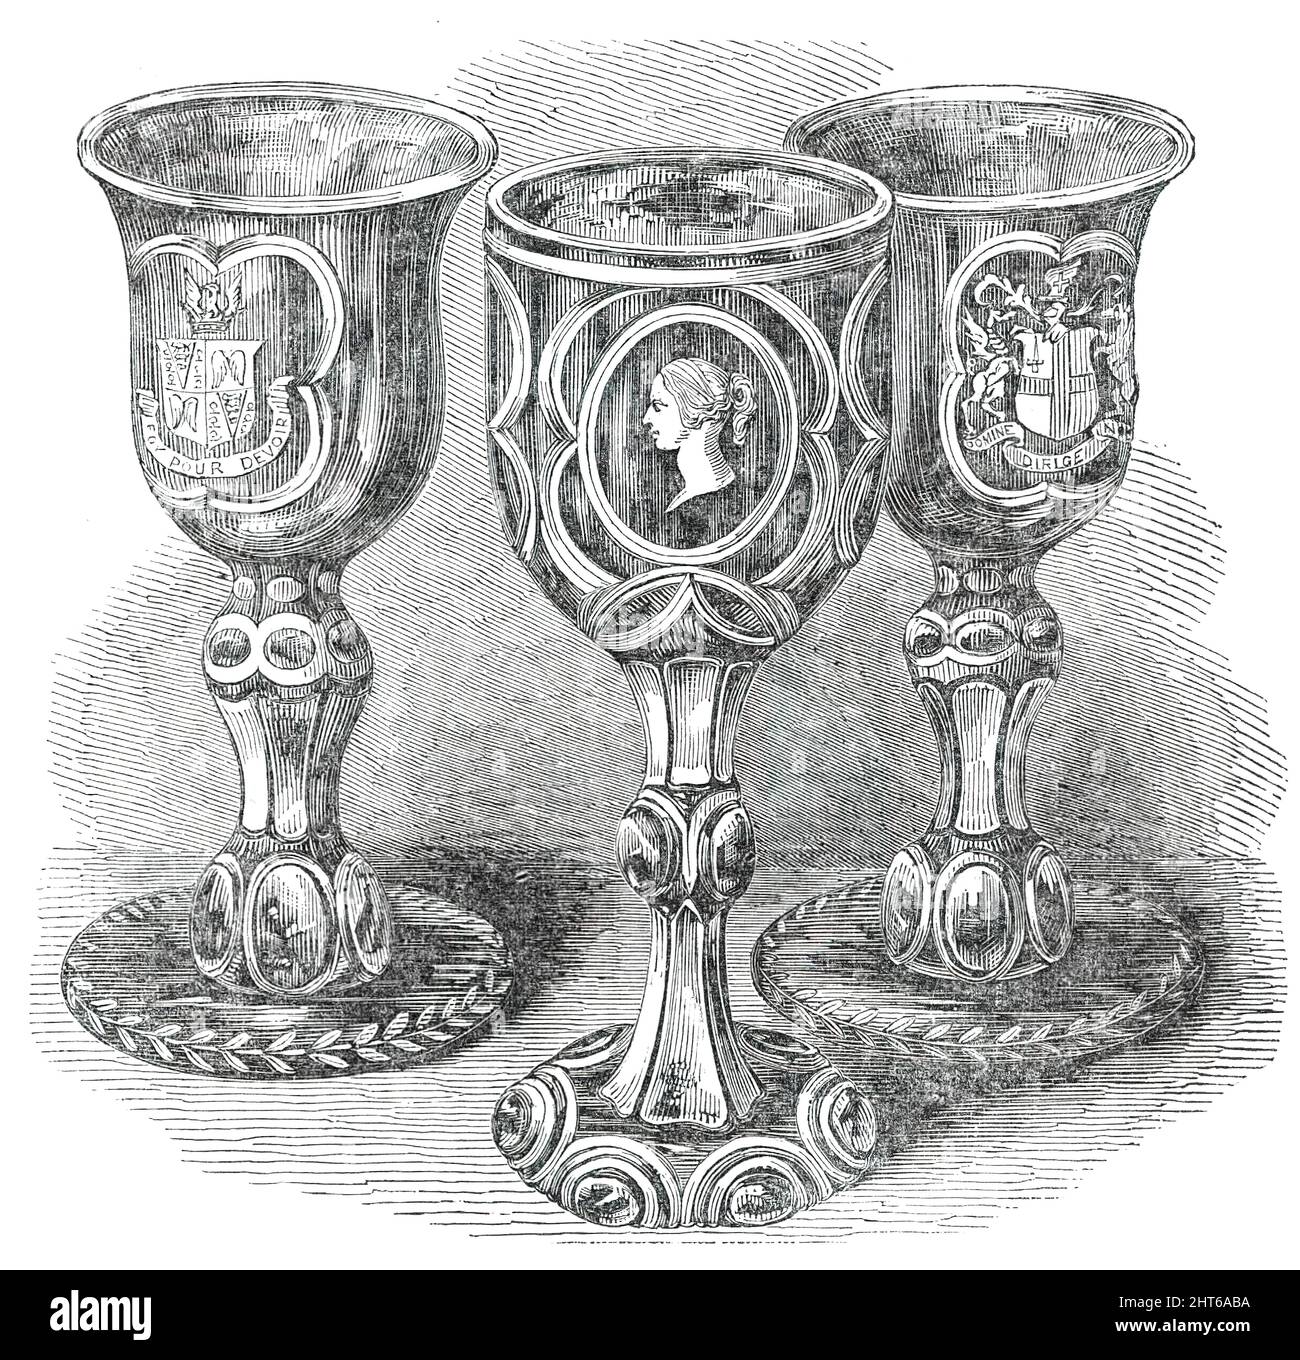 The Banquet in the Guildhall at York - Cups used by the Lord Mayor of York, H.R.H. Prince Albert, and the Lord Mayor of London, 1850. ''...three superb drinking-cups, one for his Royal Highness Prince Albert, and one for each of the Lord Mayors of London and York; the first in ruby glass, portions of the stem and base internally checkered with silver, and on the sides bearing white sunken medallions of her Majesty and the Prince Consort, and the Royal arms of England. The other two cups were of the same size and shape, but, instead of being ruby and silver, the colours were emerald and silver; Stock Photo